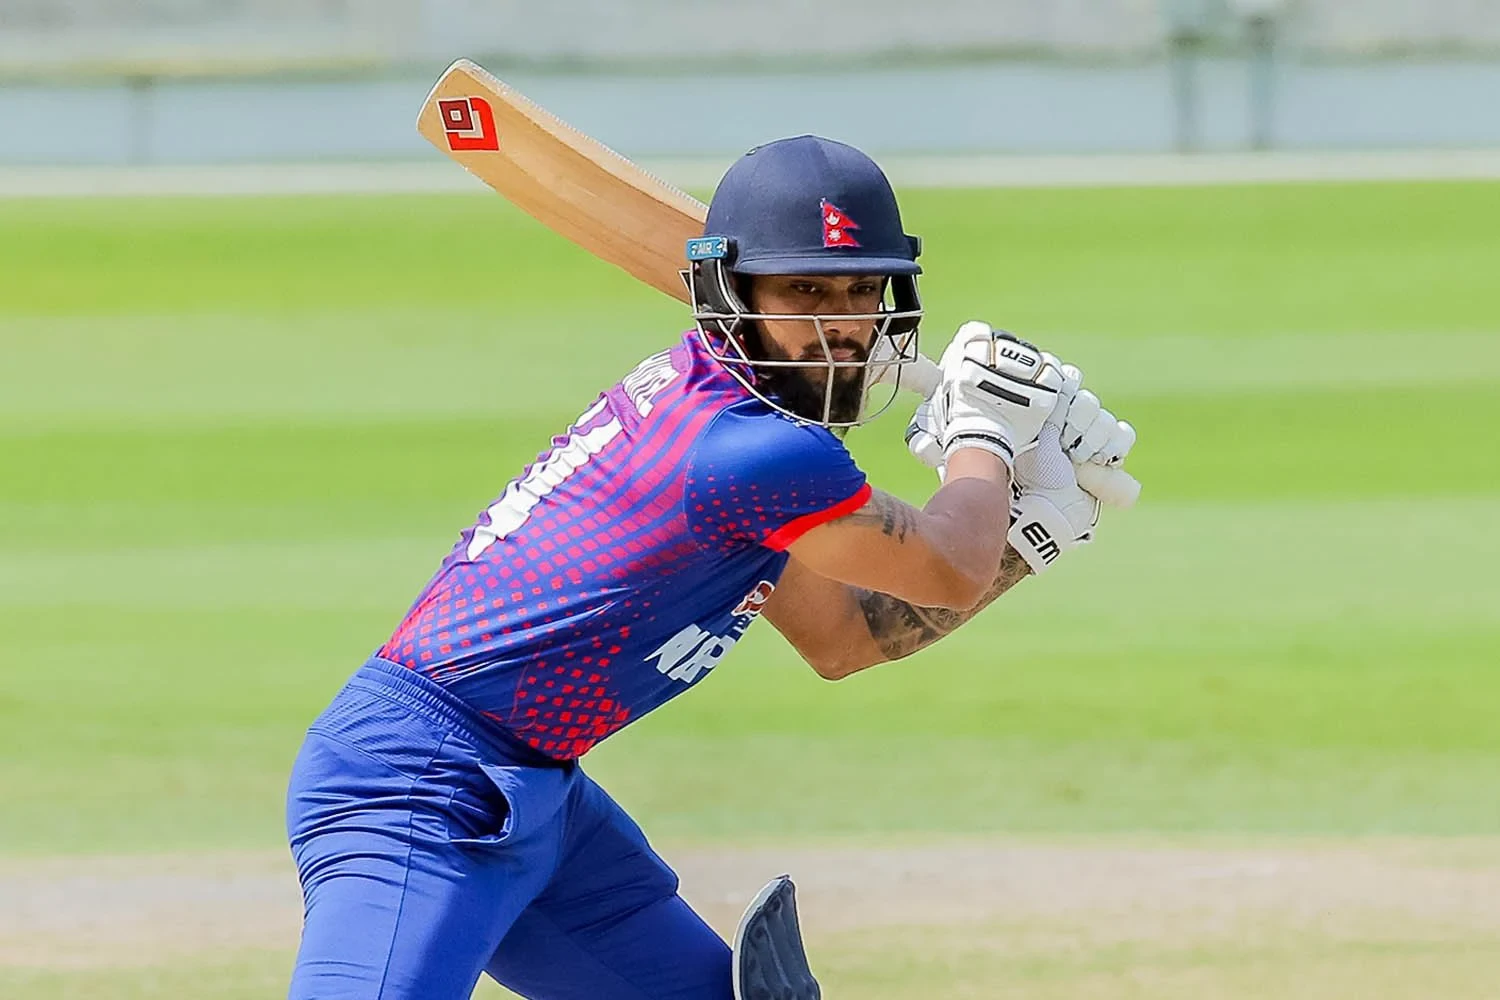 Nepal vs. Canada ODI Series Update: Nepal off to a steady start in chase